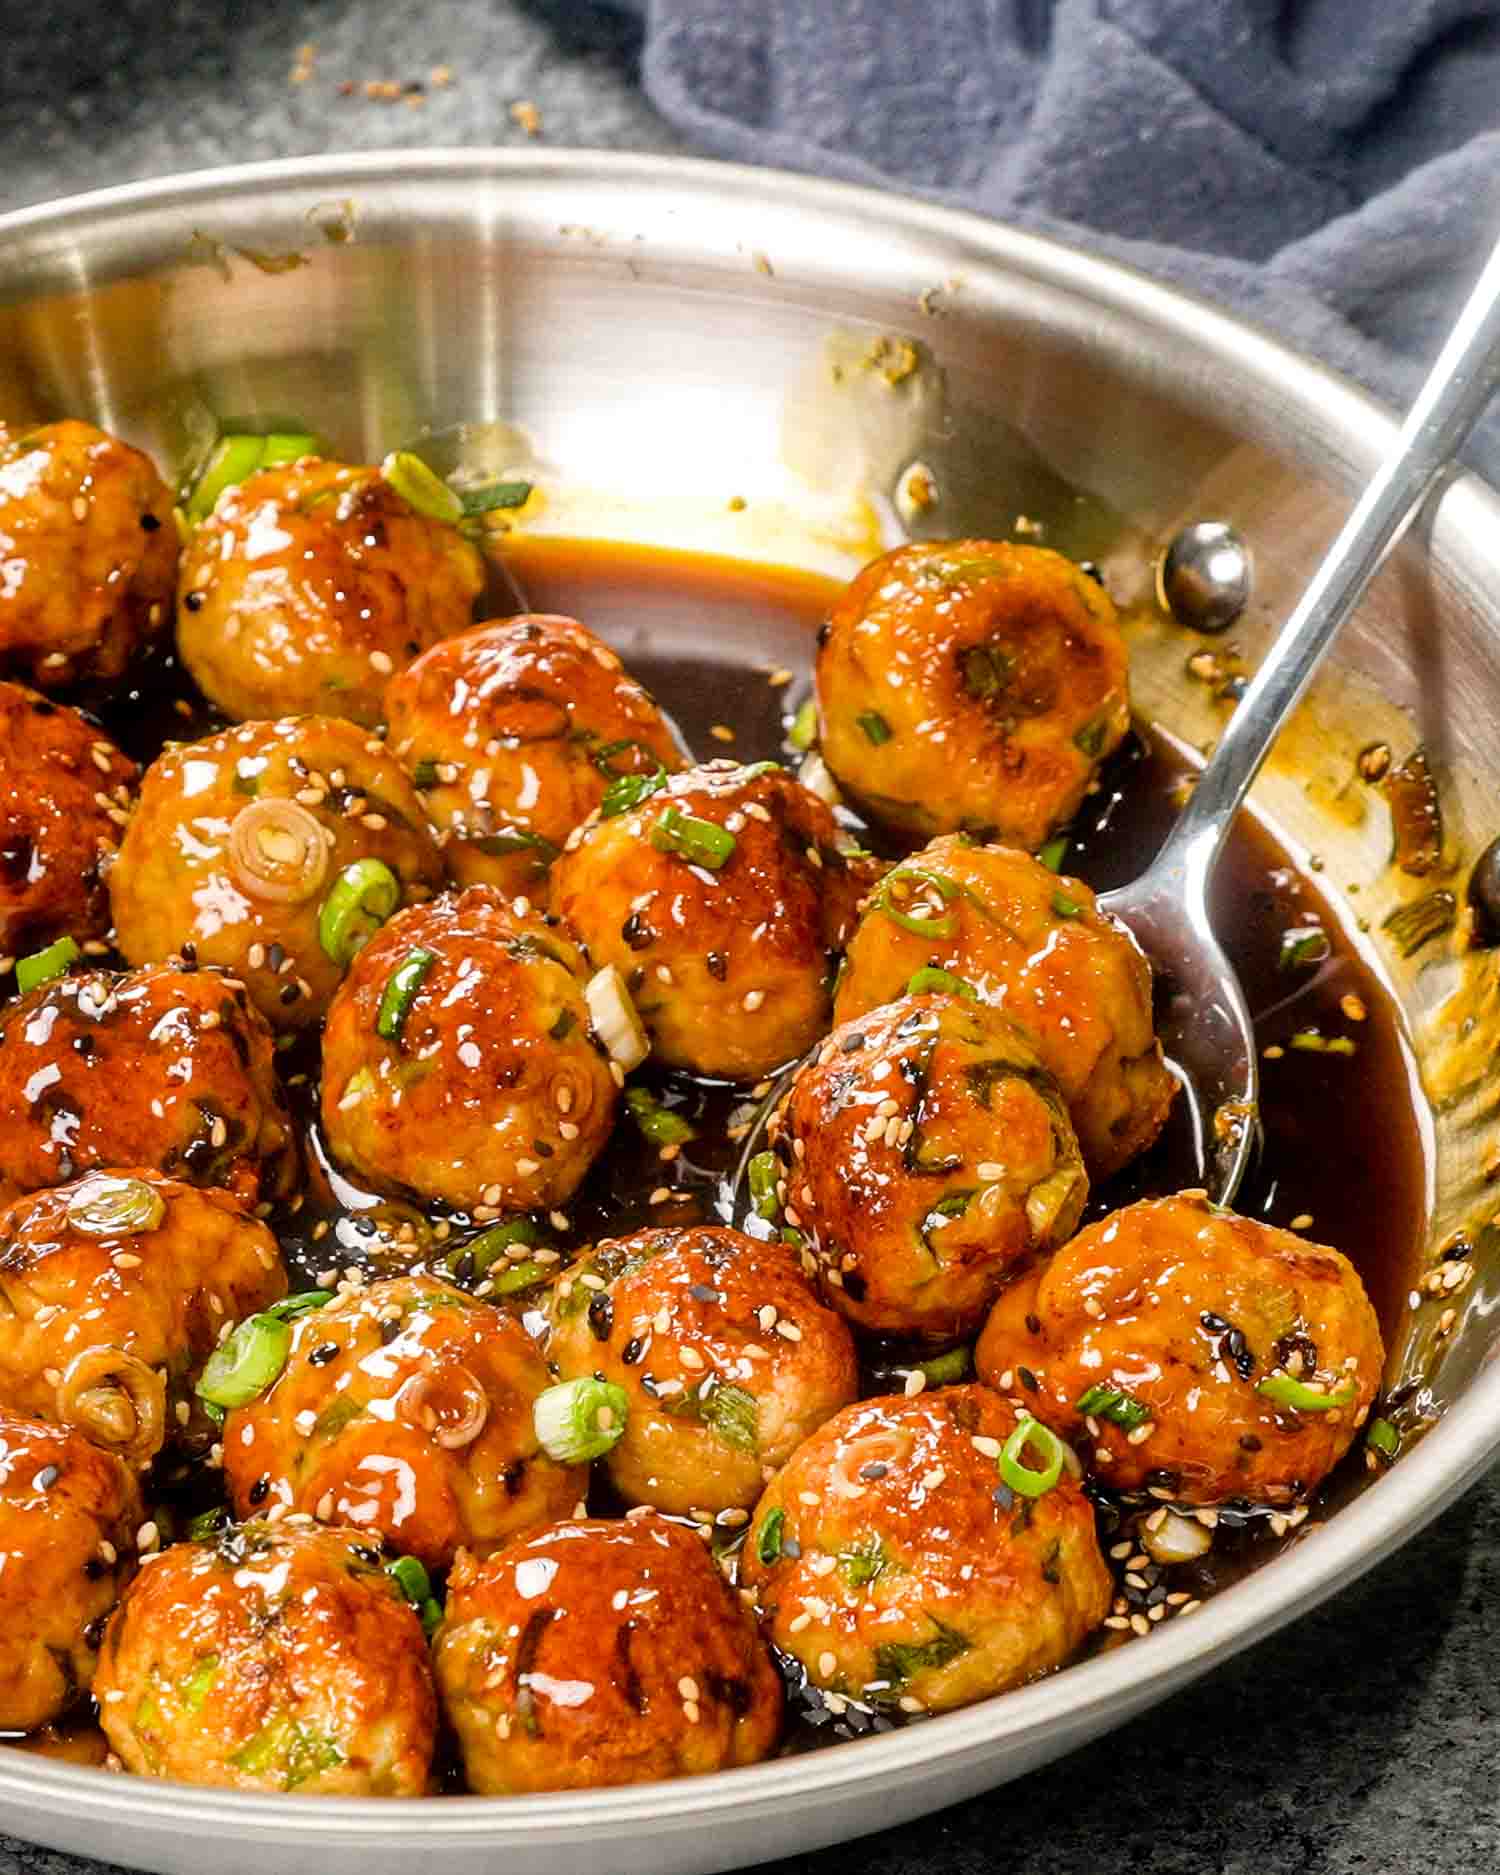 teriyaki chicken meatballs in a skillet garnished with green onions.